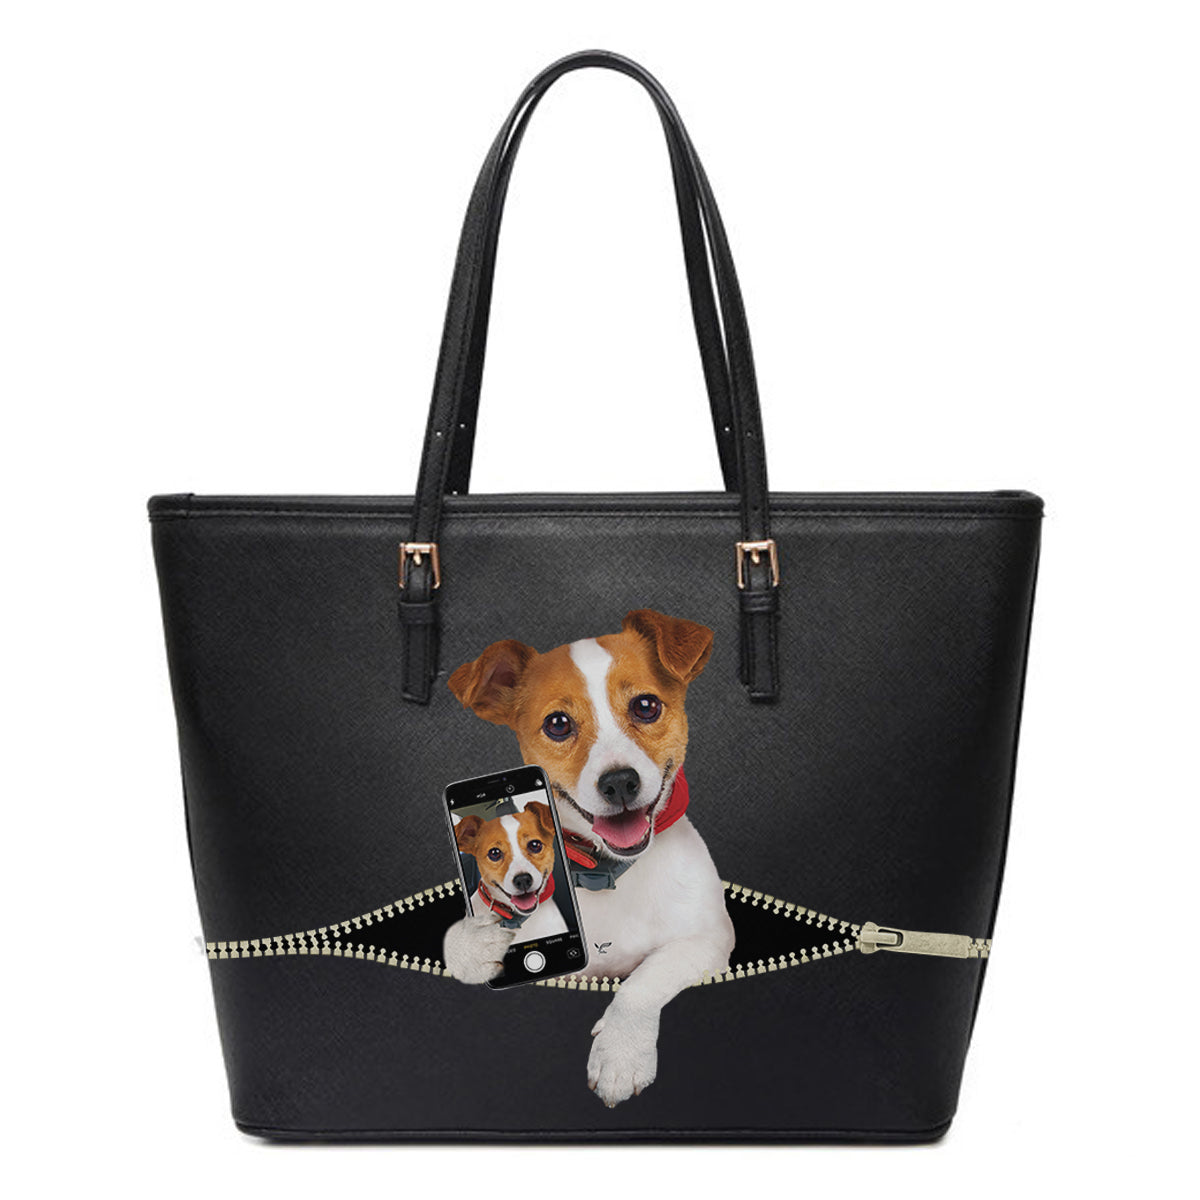 Do You Like My Selfie - Jack Russell Terrier Tote Bag V1